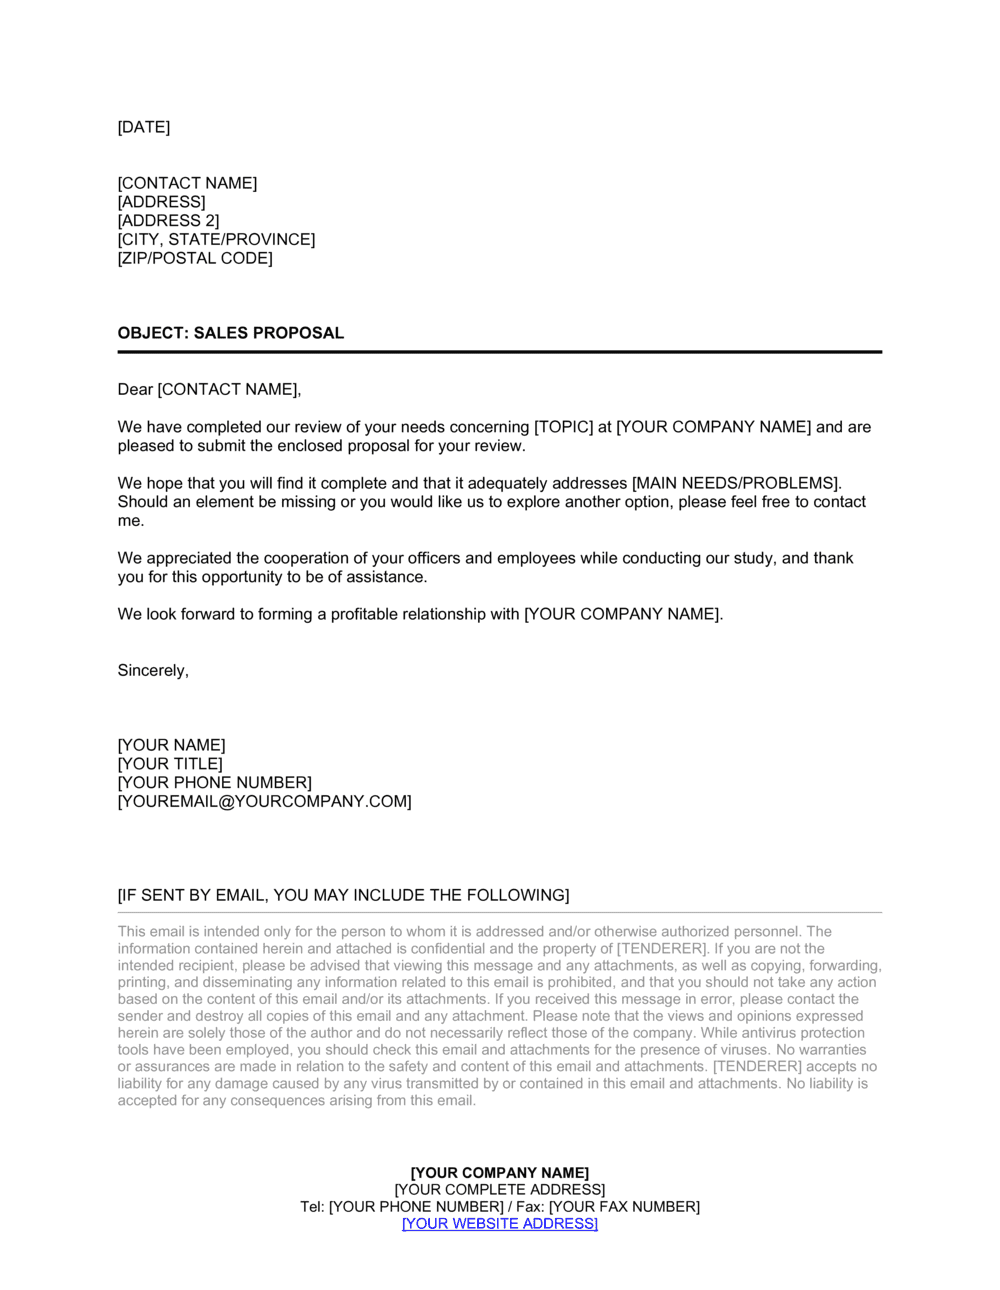 Letter Enclosing Proposal Long Template  by Business-in-a-Box™